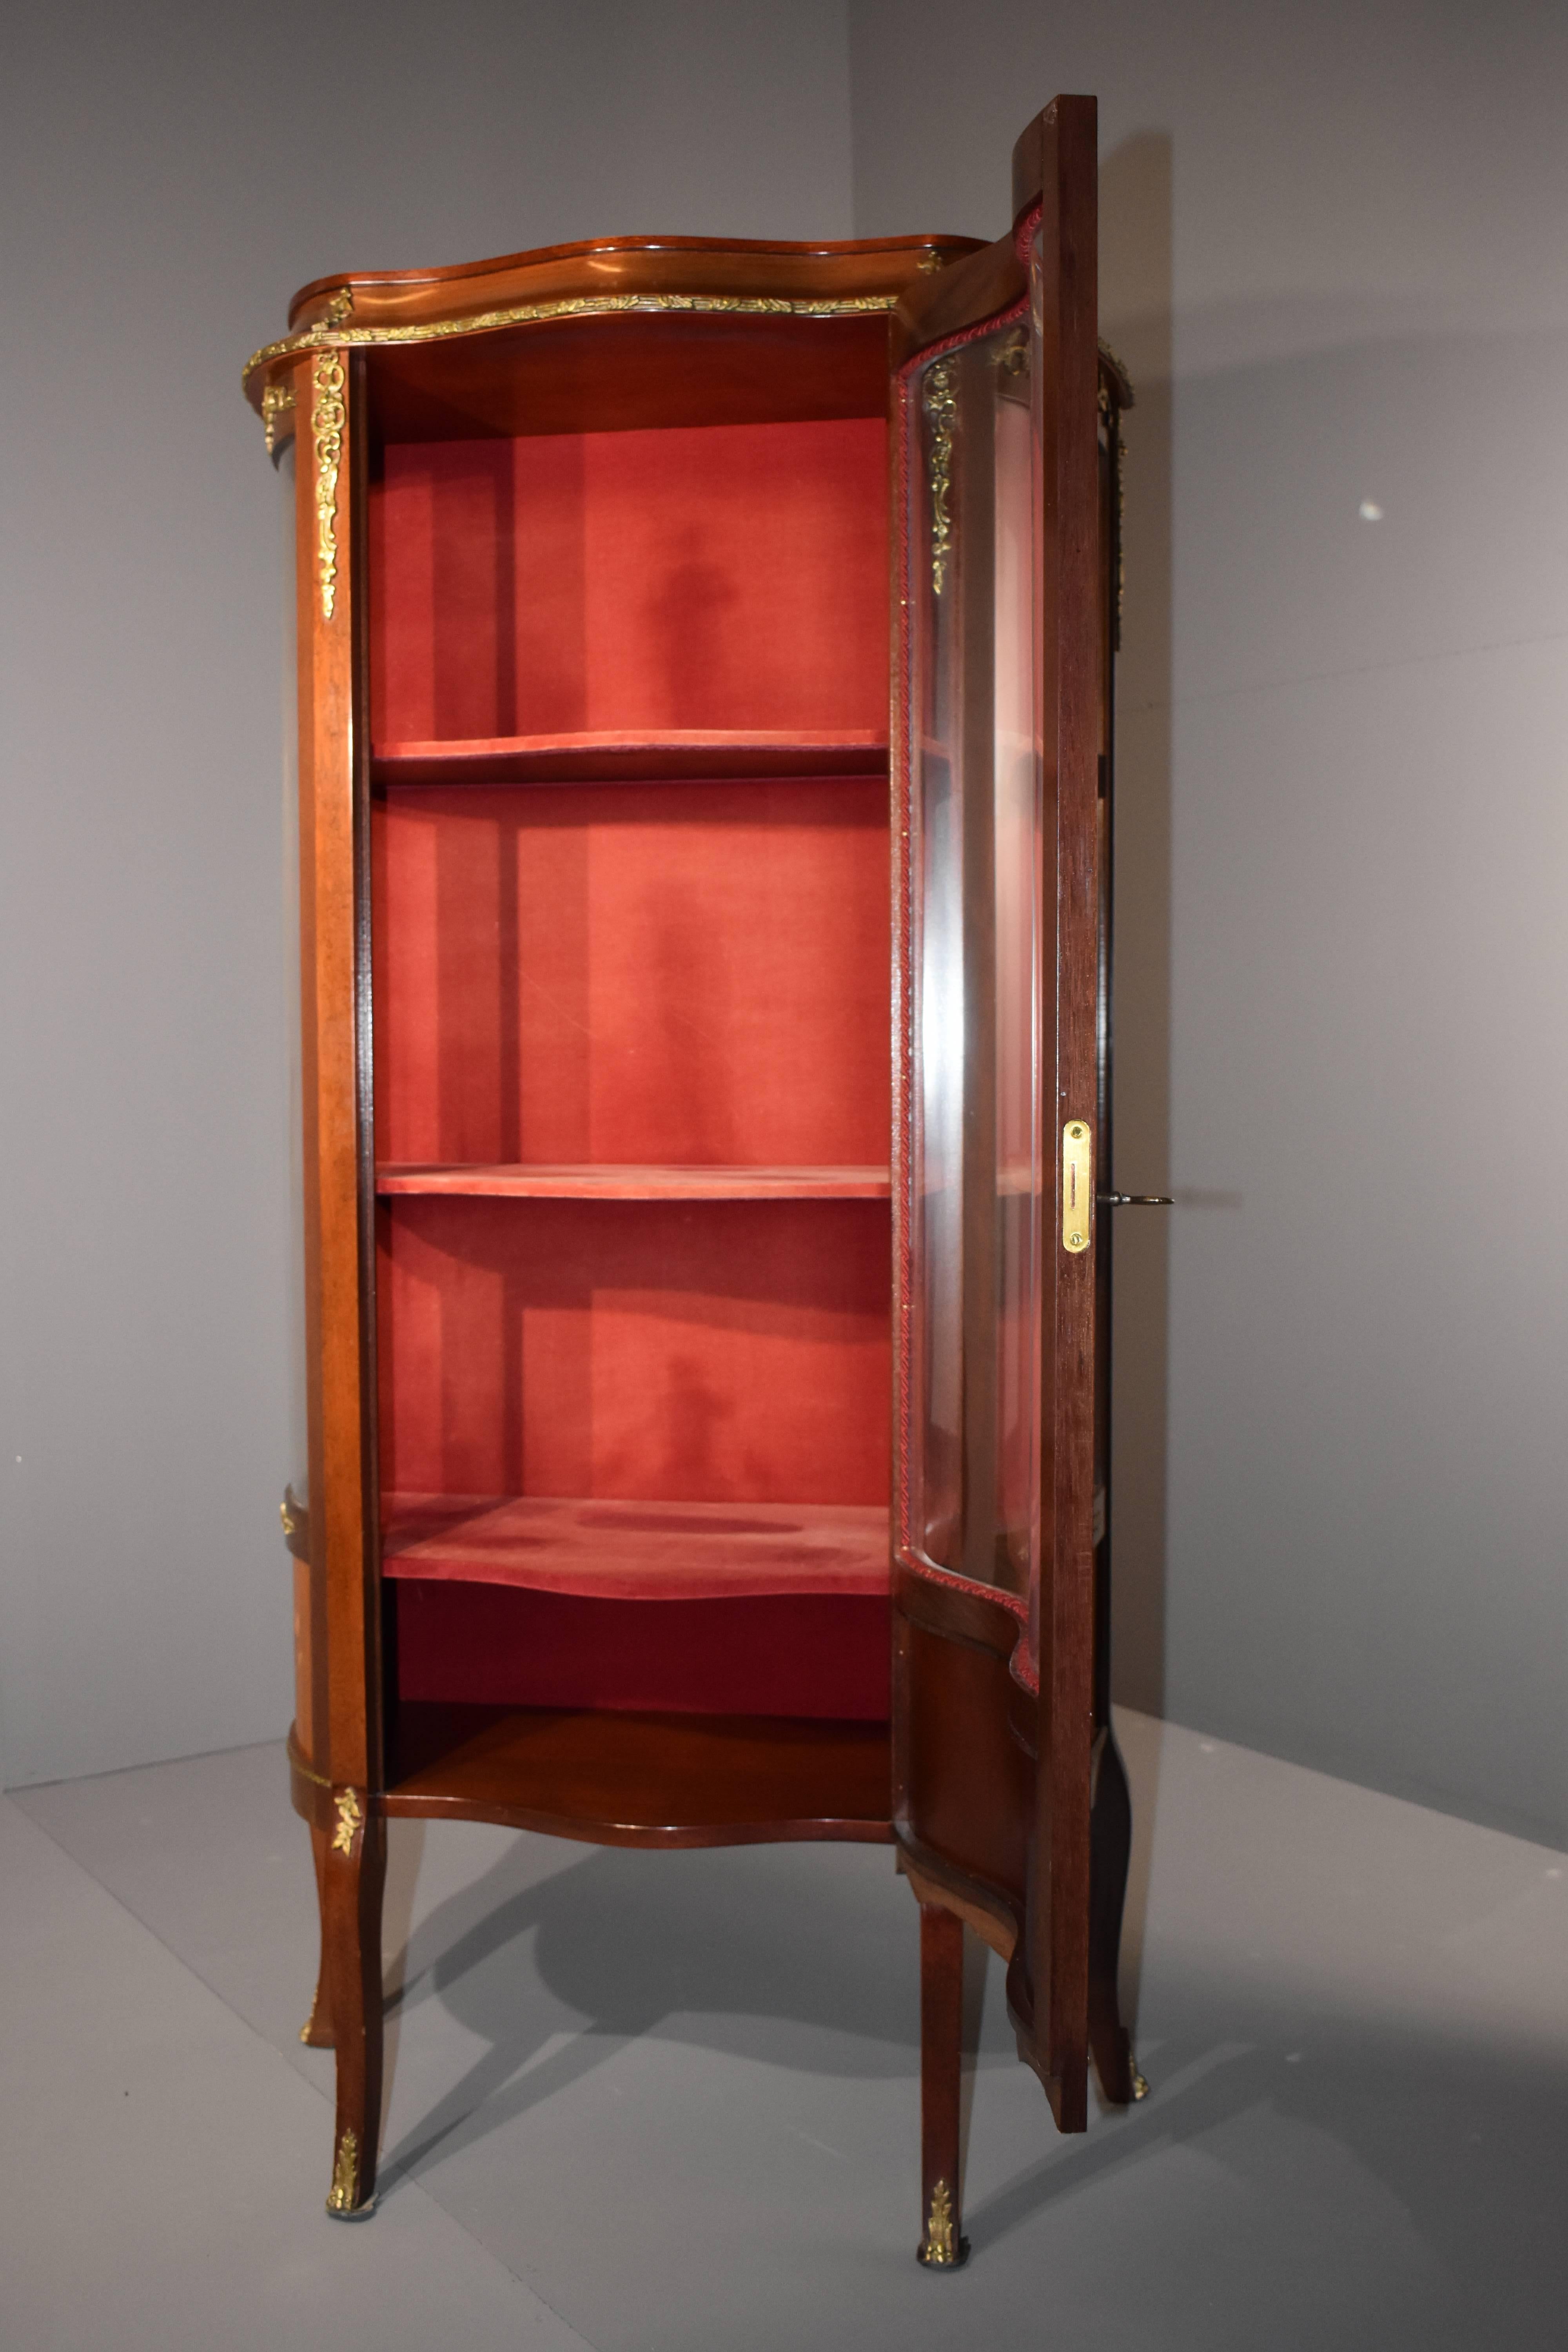 Cambered body, three-sided to three-section, curly feet, rich in decorative bronze fittings.
The inside of the cabinet is covered with red velvet.
 